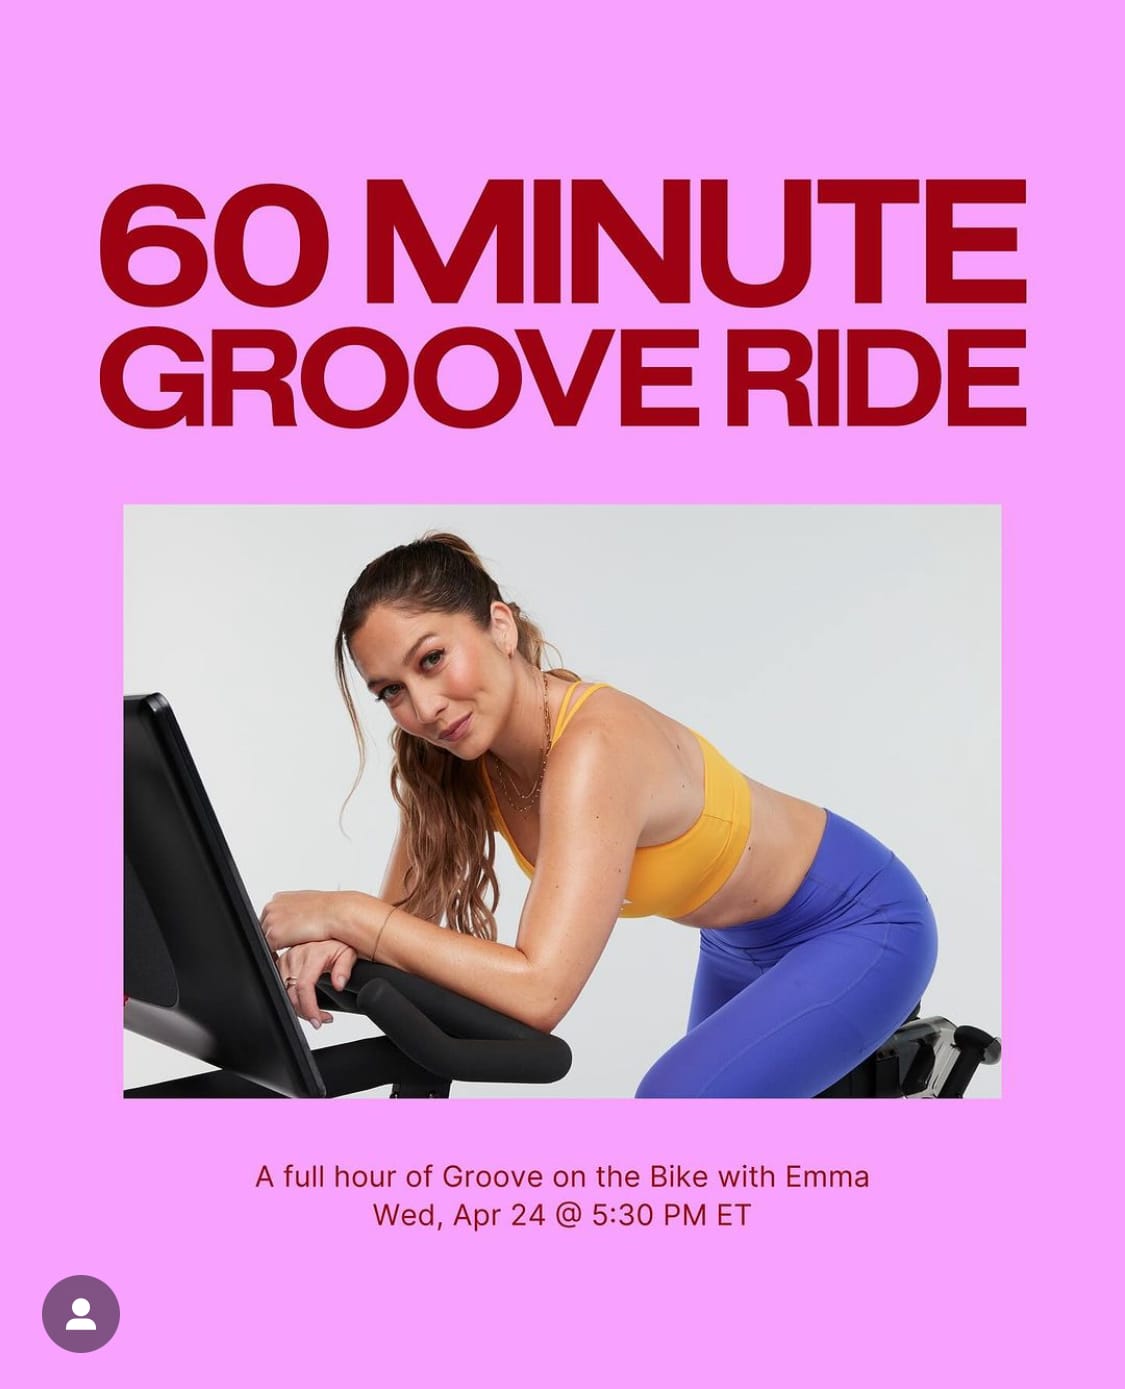 Peloton’s “This Week at Peloton” Instagram post highlighting 60 minute Groove Ride with Emma Lovewell. Image credit Peloton social media.